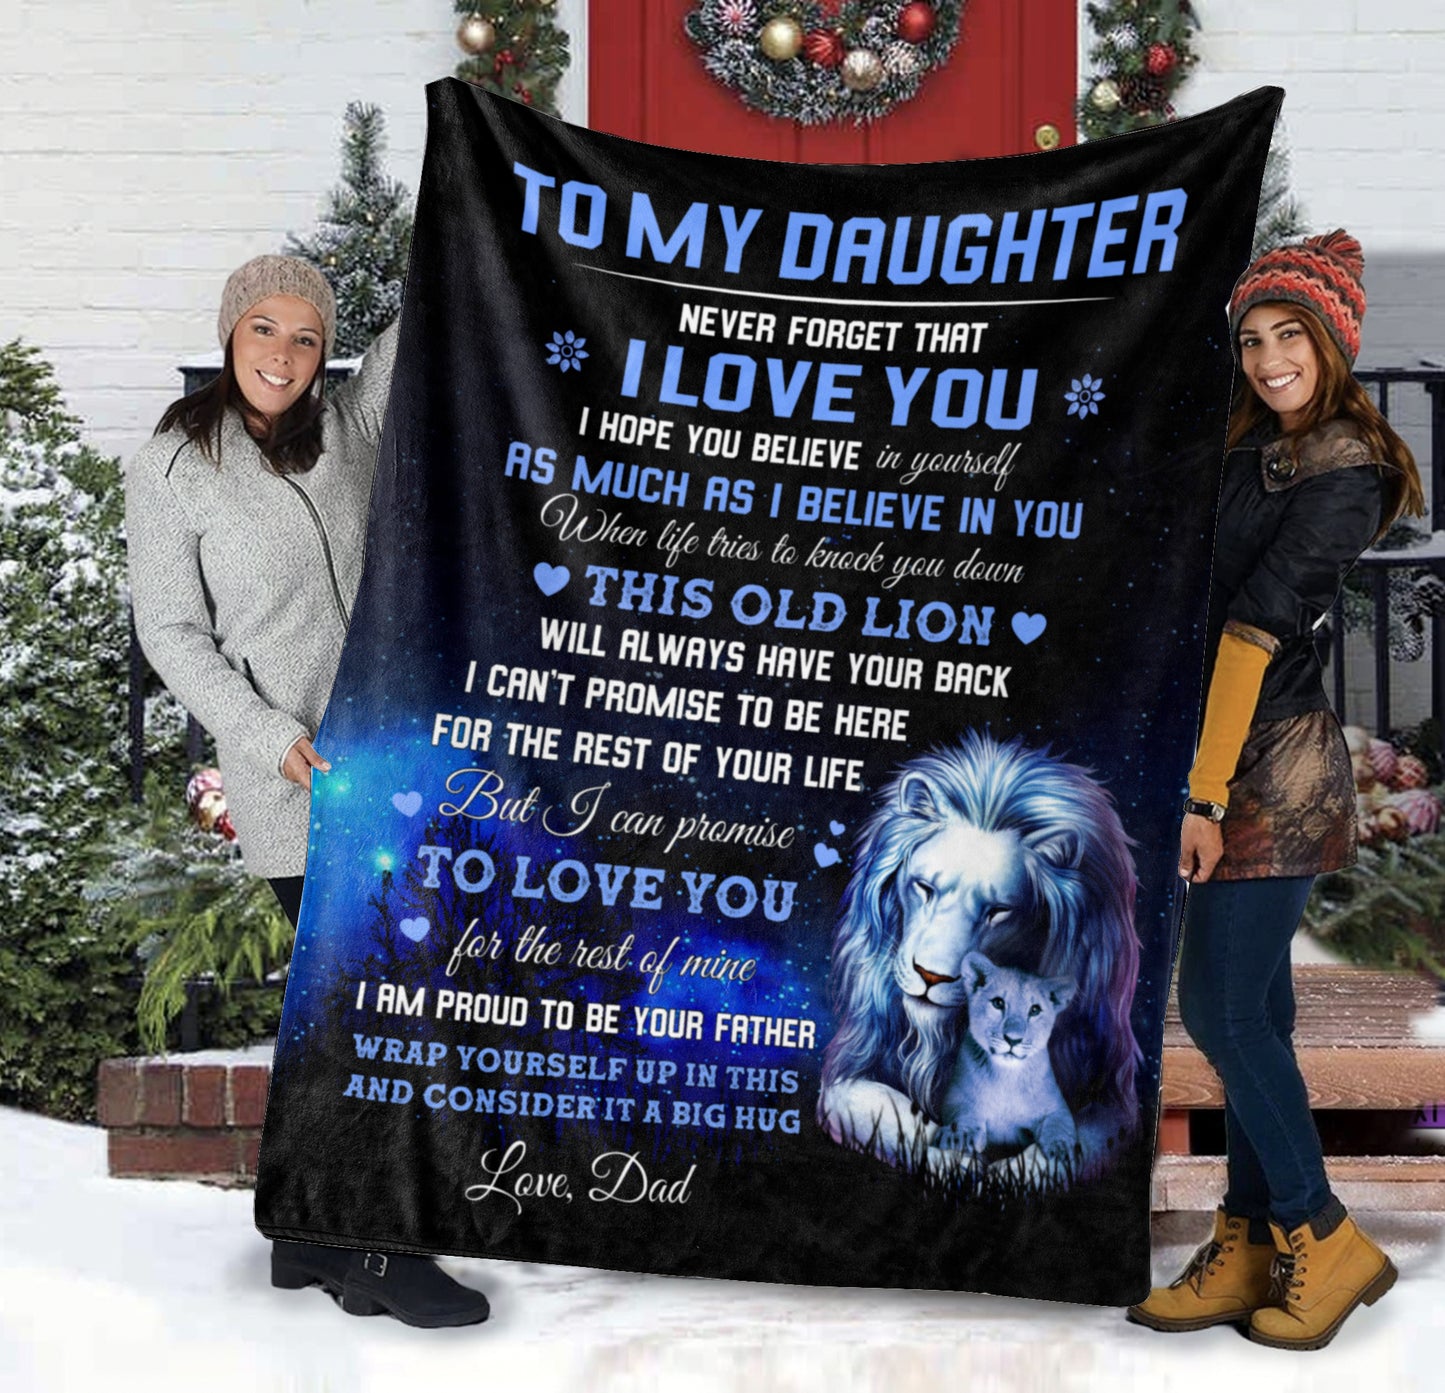 To My Daughter from Dad - This Old Lion Cozy Throw Blanket- Cozy Plush Fleece Blanket - 50x60 in.